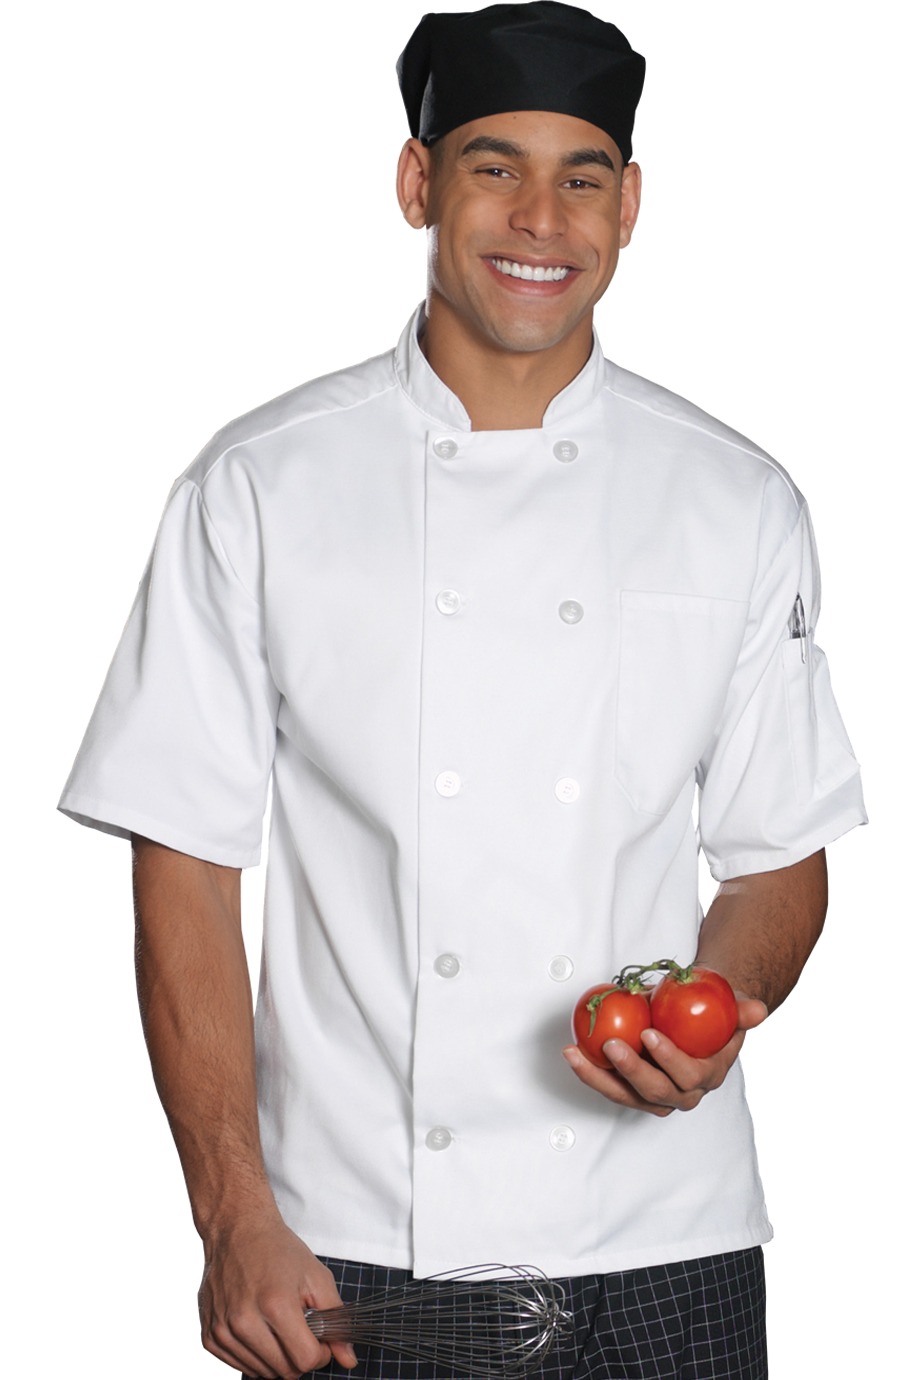 Edwards Garment 3306 - Casual 10 Button Short Sleeve Chef Coat